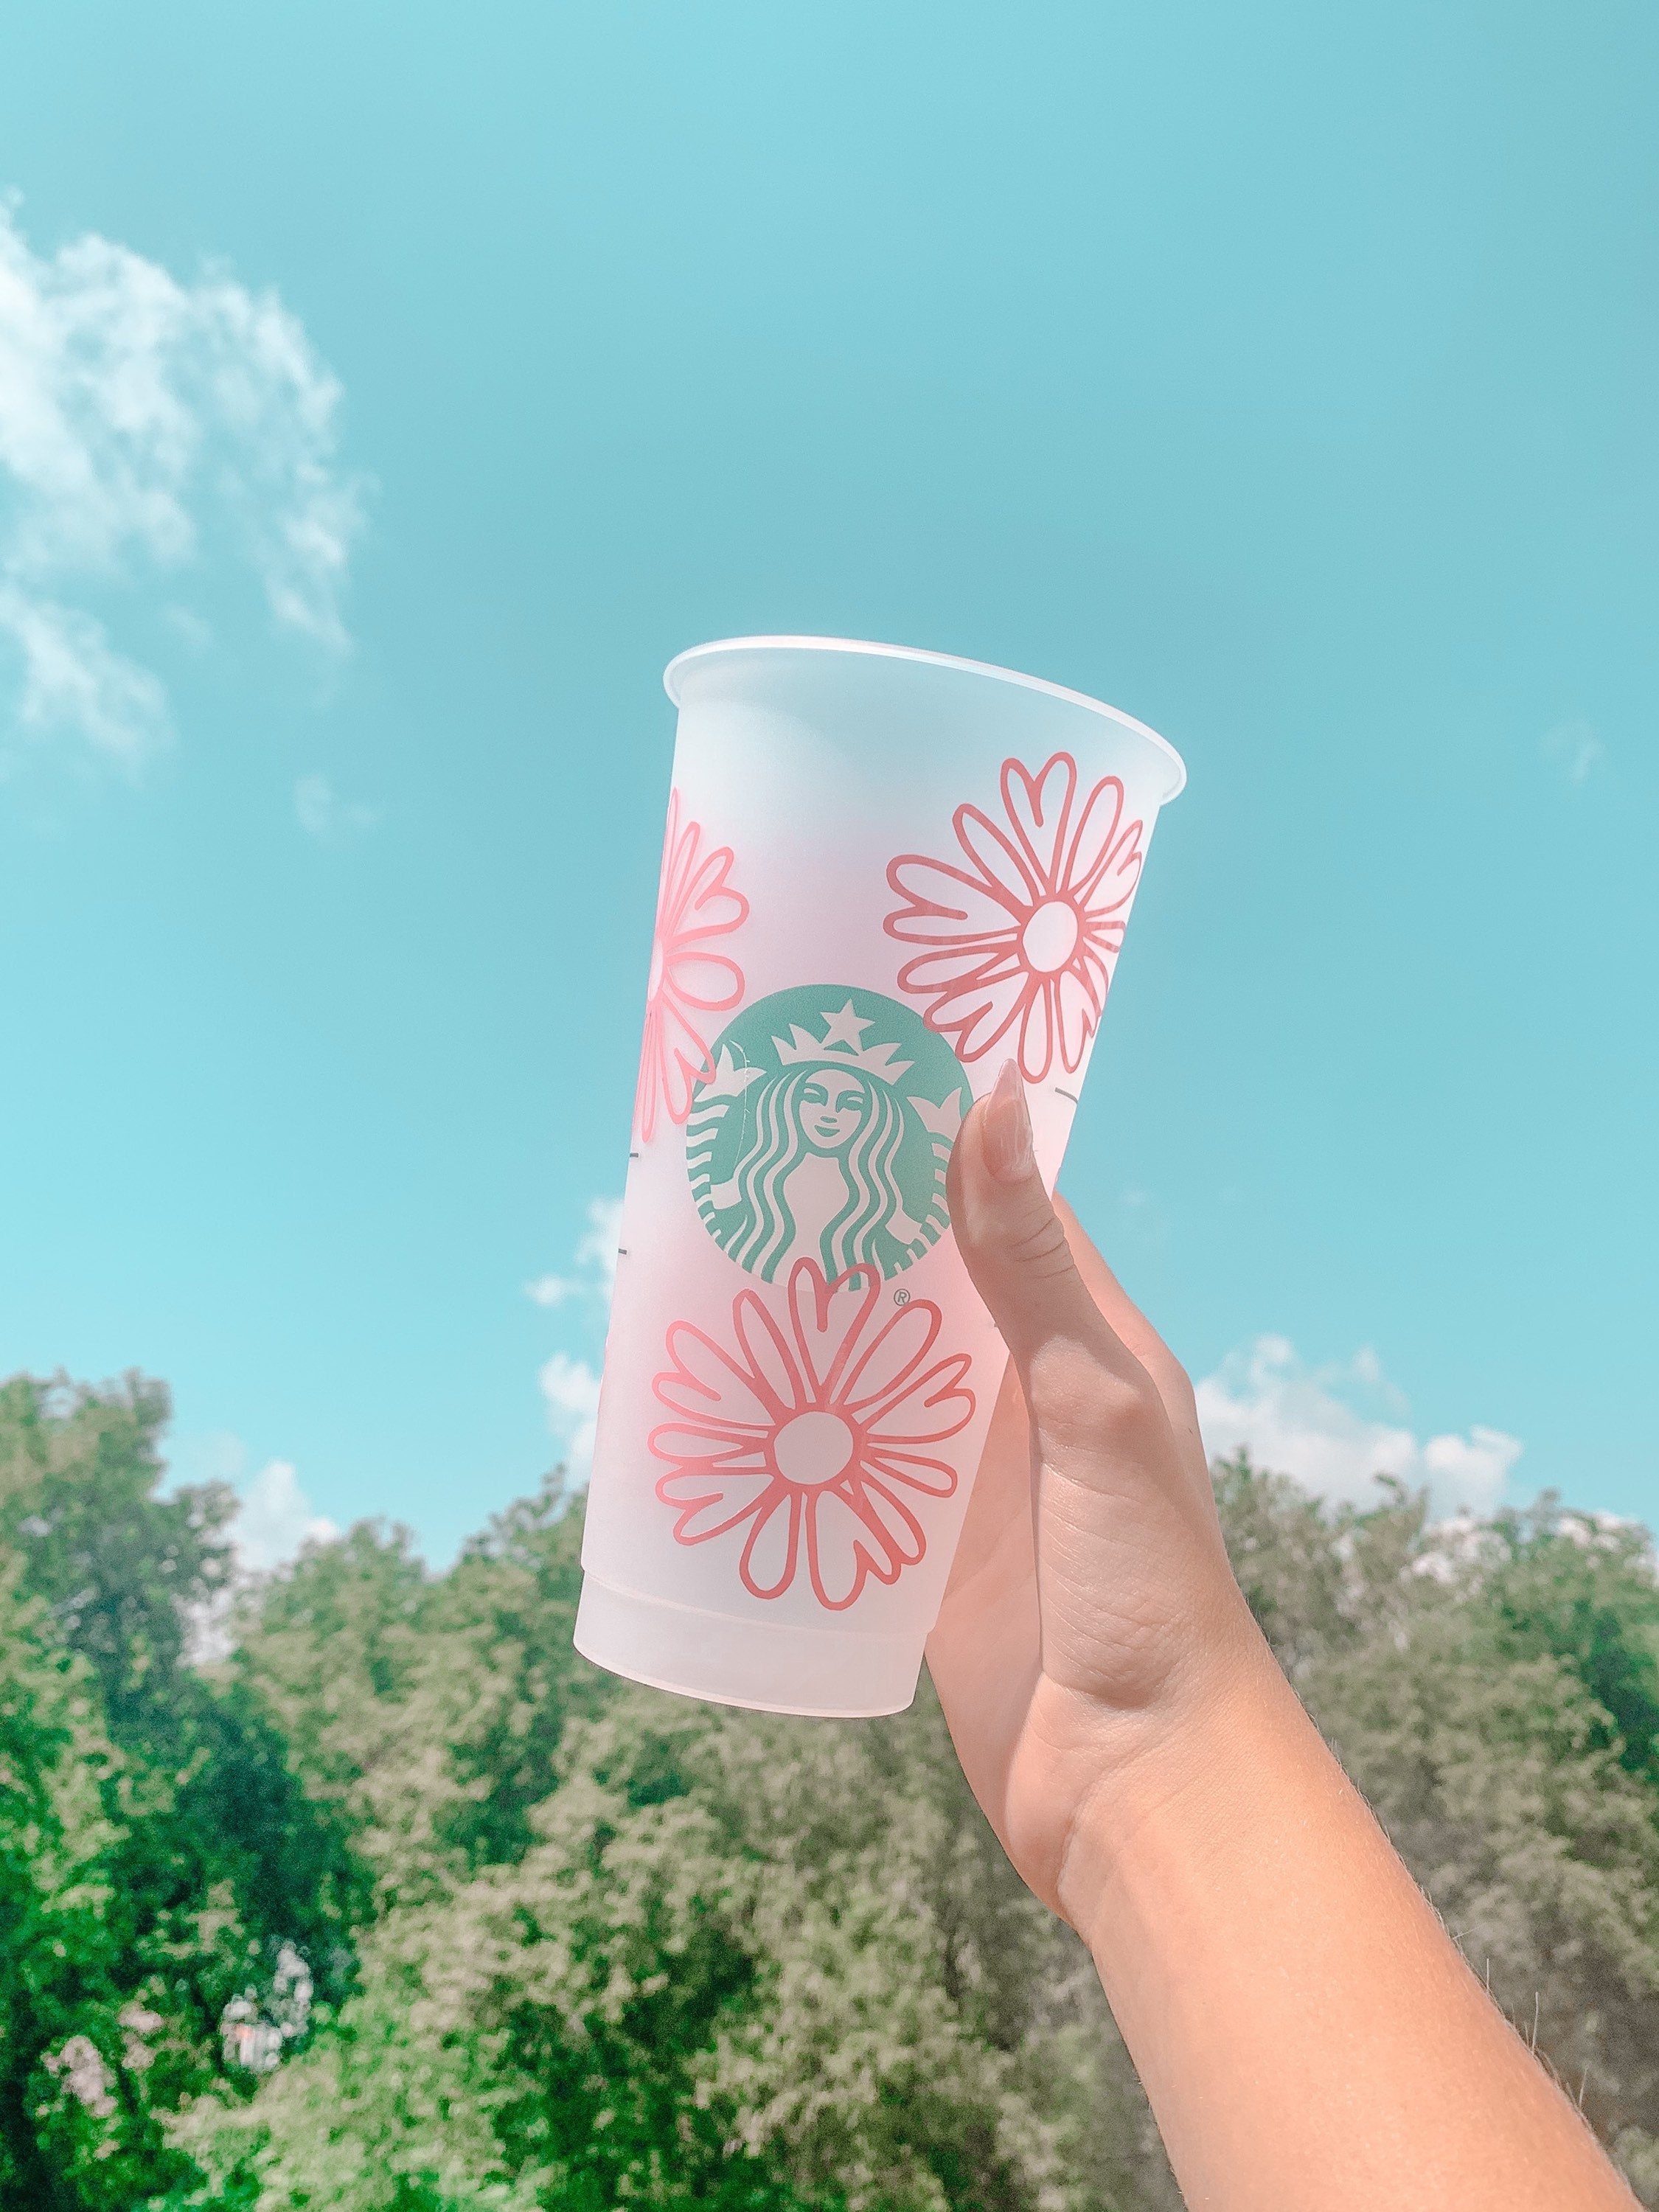 Reusable Cold Cup with Preppy Monkeys- used for iced coffee, frappes and  more - comes with reusable straw | NOT DISHWASHER SAFE